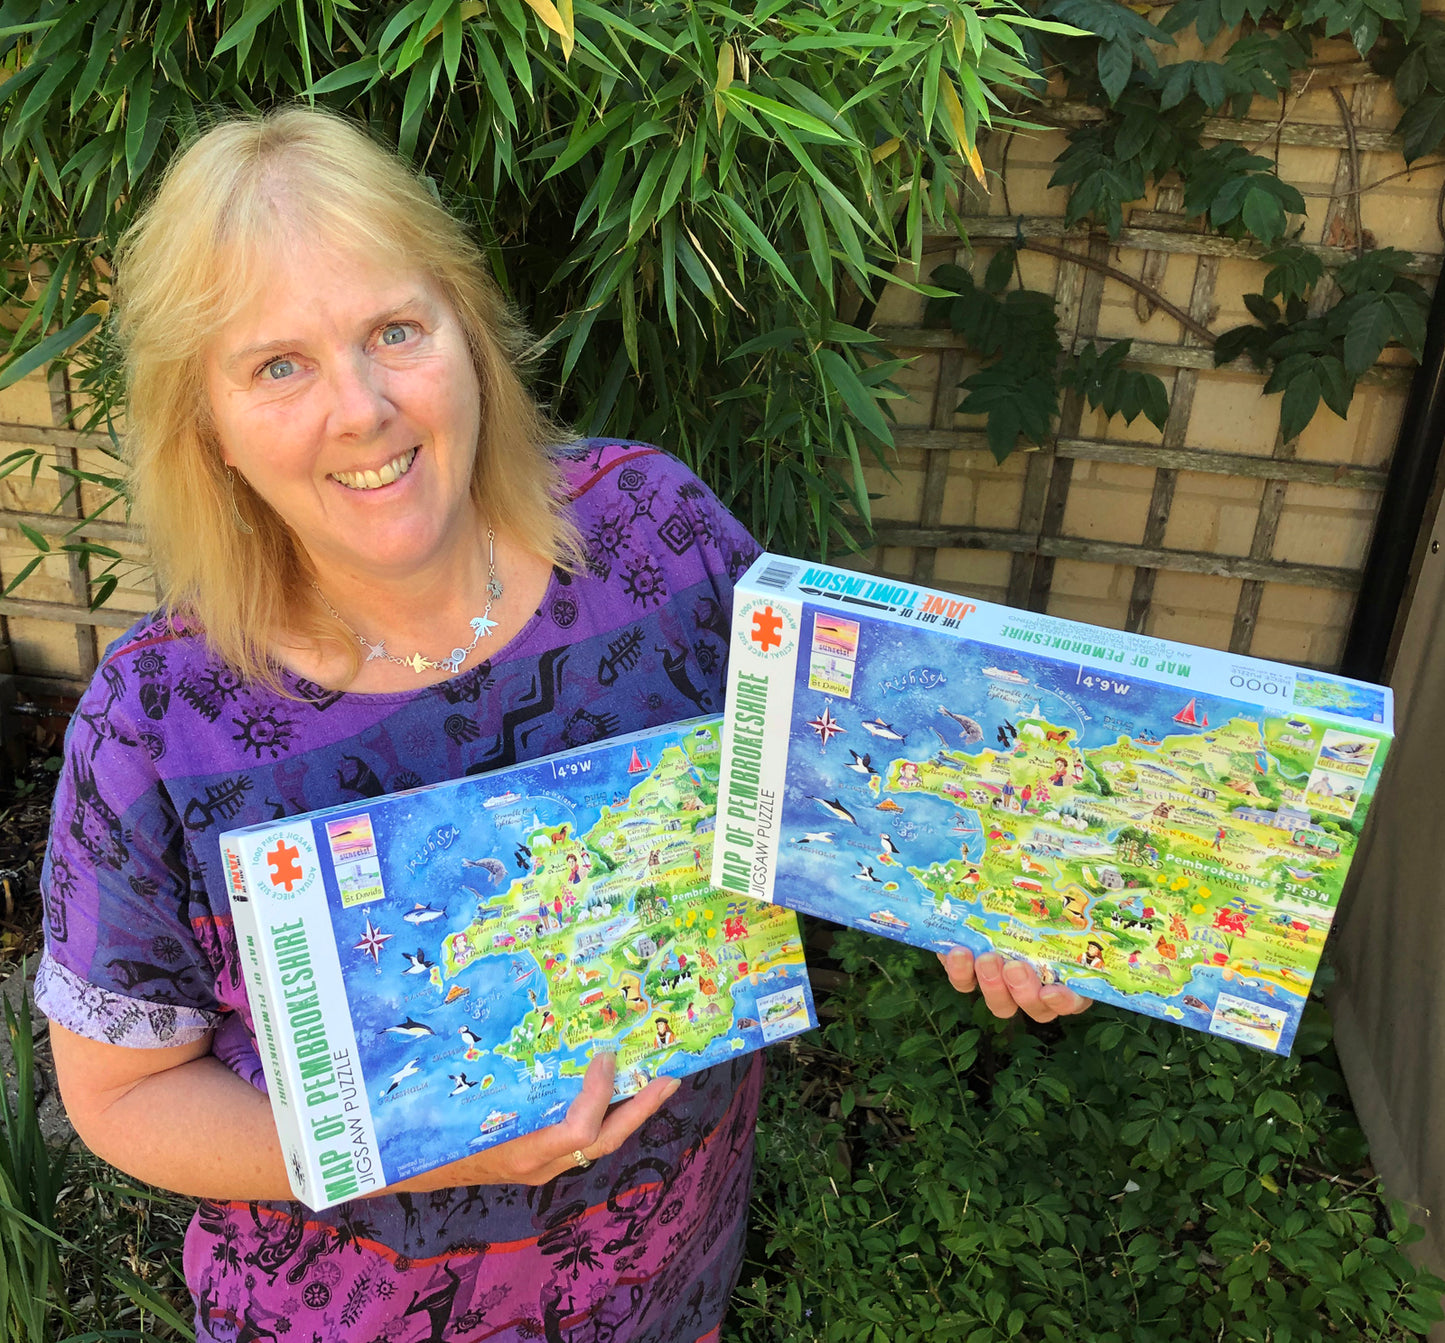 Pembrokeshire jigsaw puzzle with Jane Tomlinson